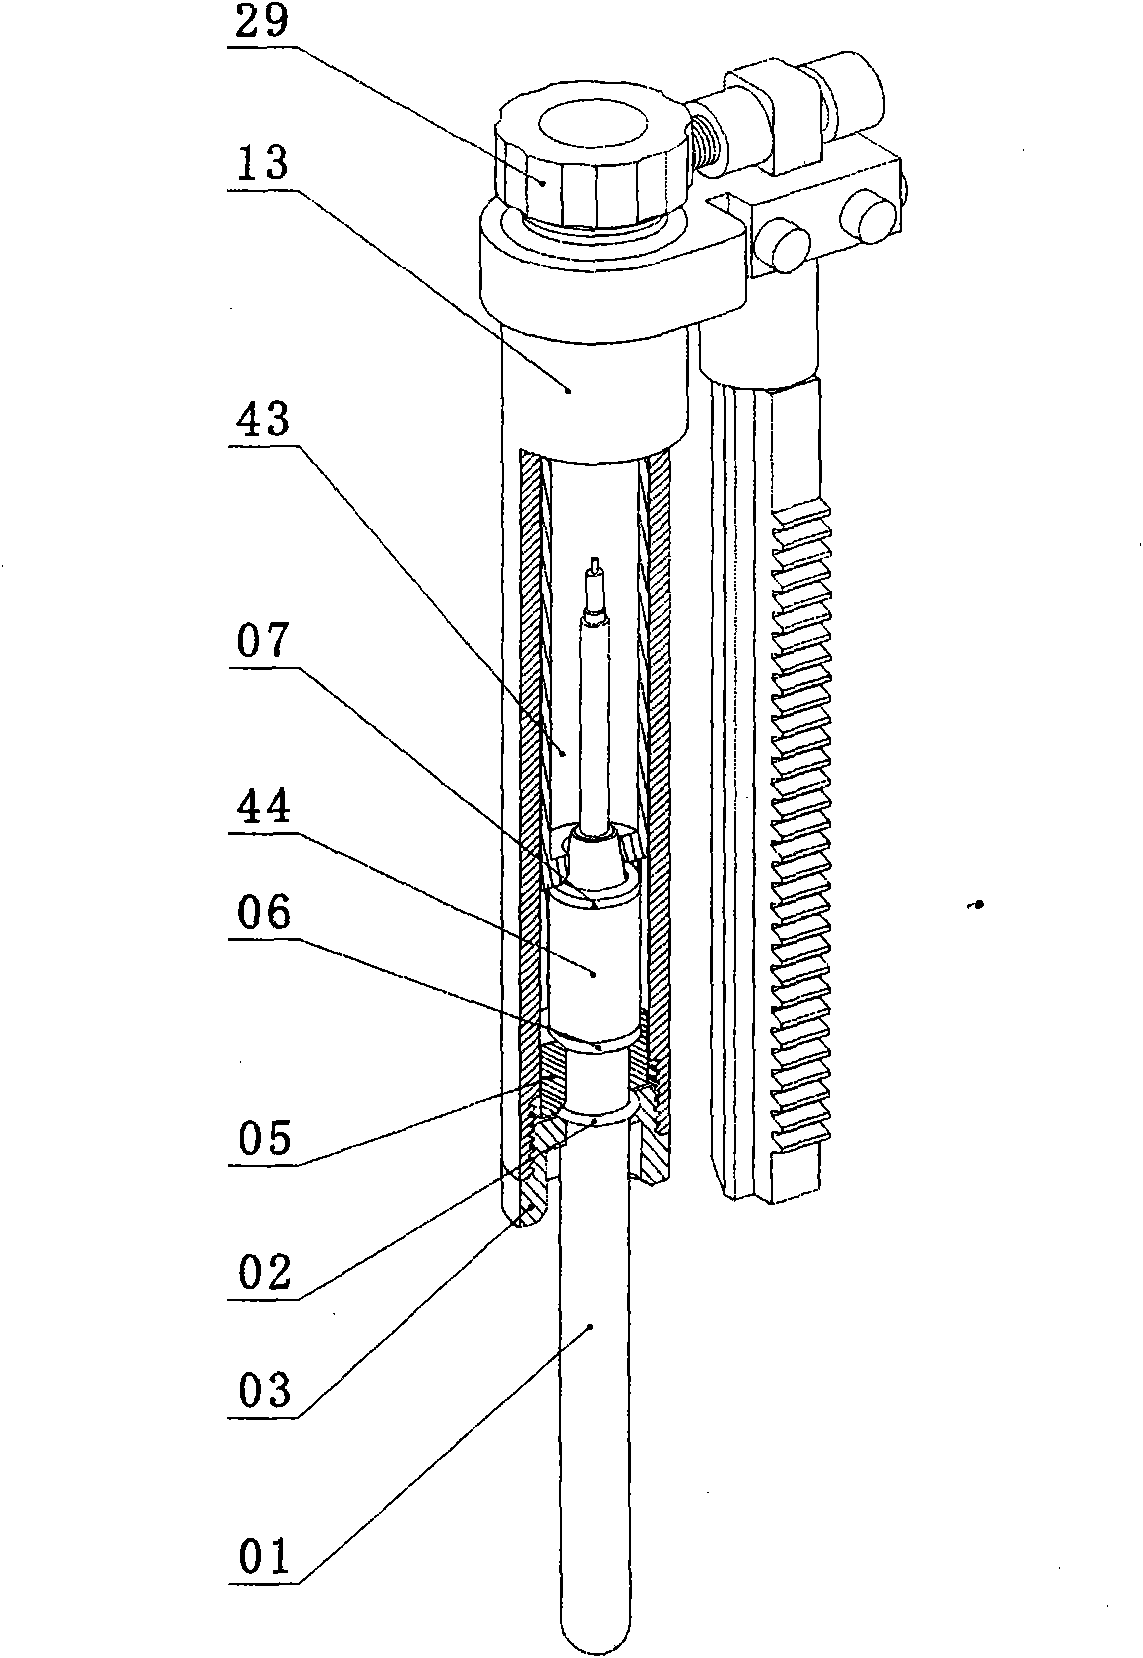 Improved double-glass pH electrode fully automatic detection device